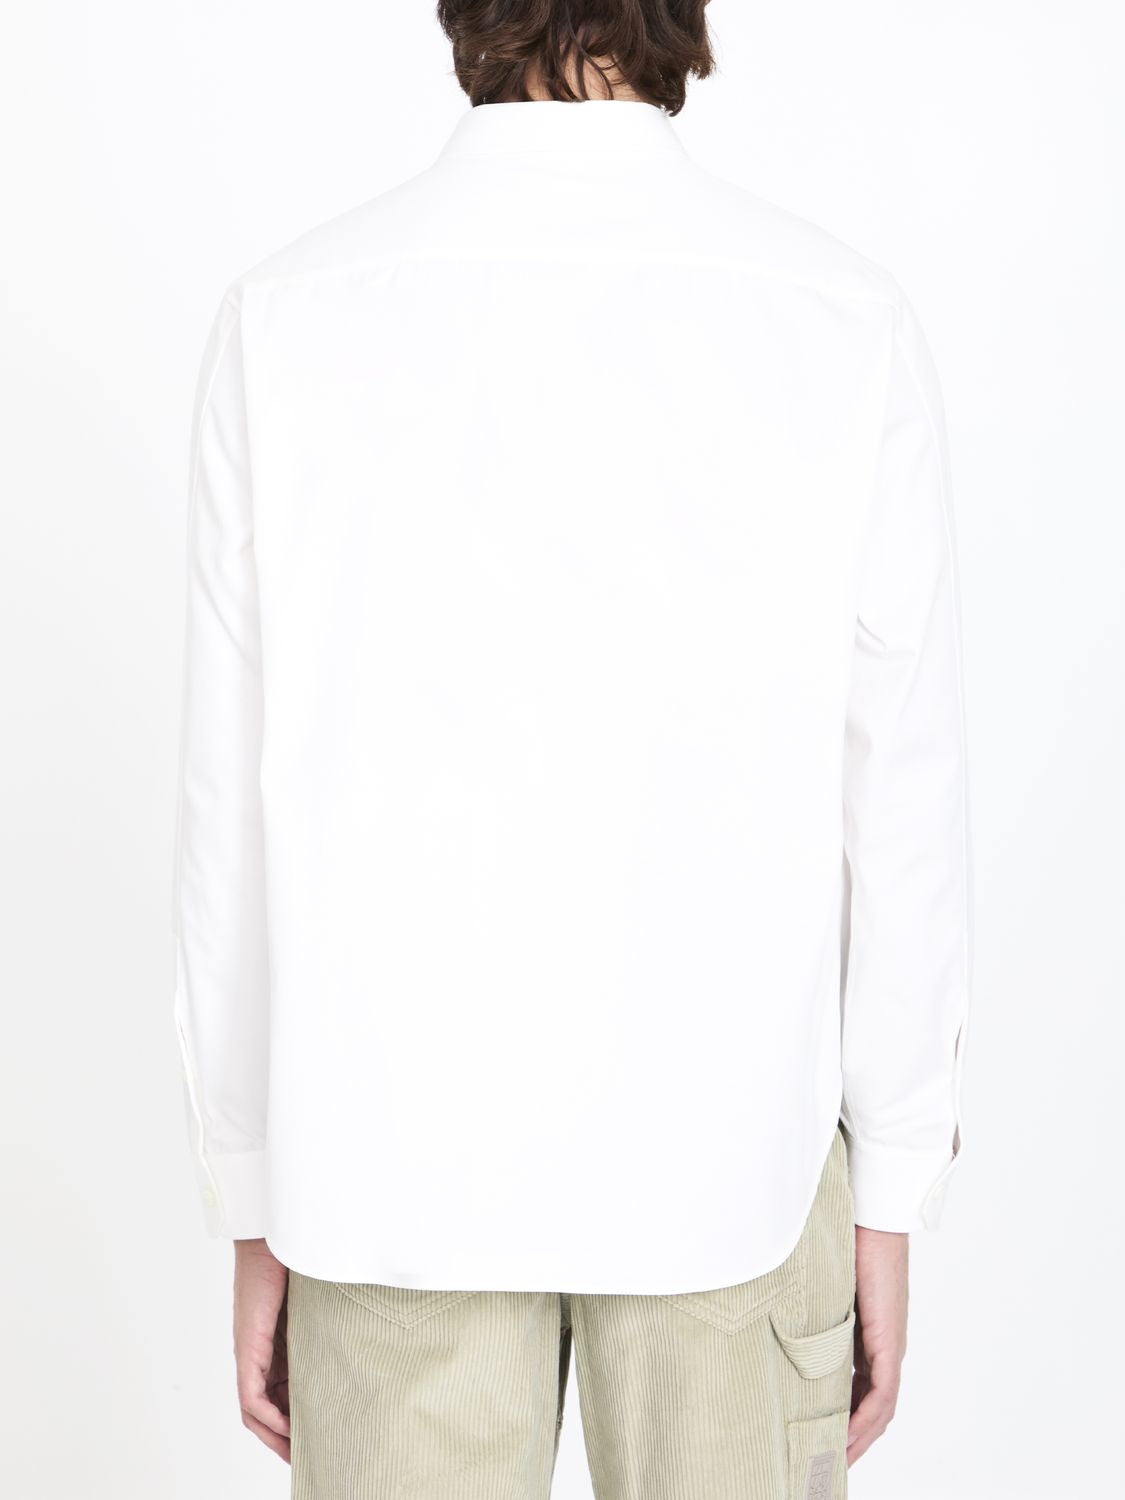 LOEWE Classic White Shirt for Men - SS24 Collection